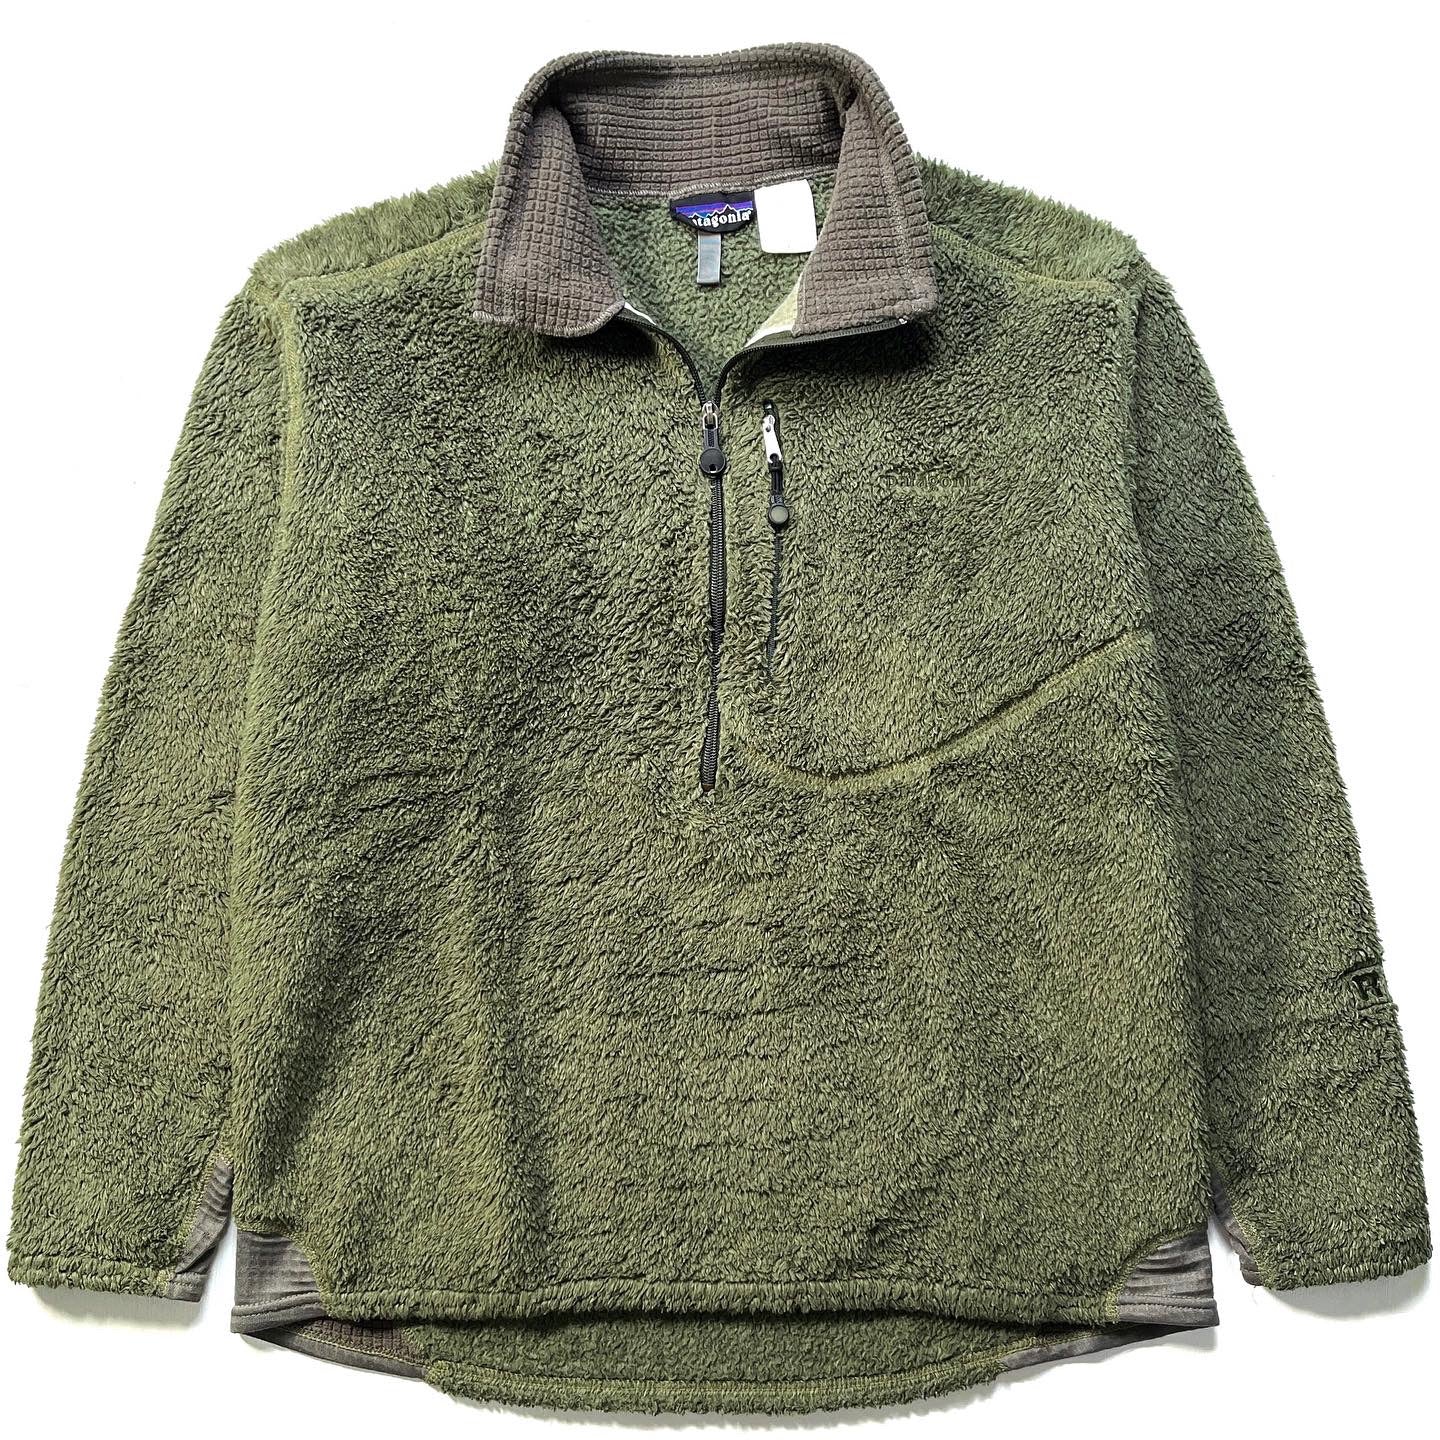 2003 Patagonia R2 Body Rug Pullover, Weathered Green (XL)